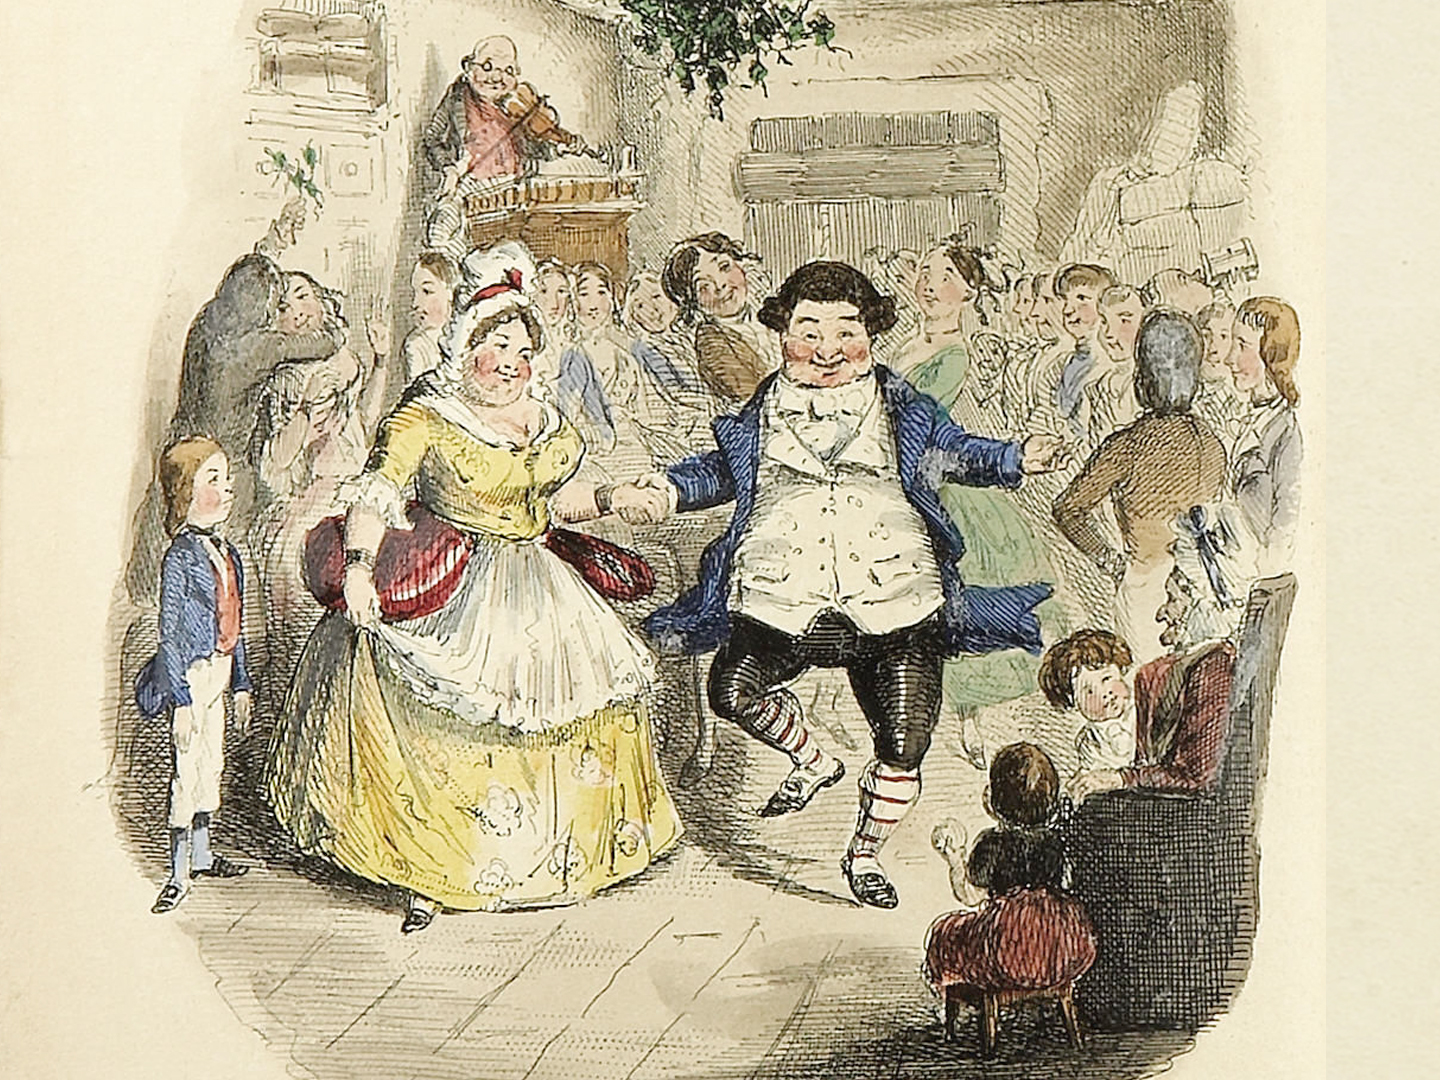 Illustration of a jolly, rosy-cheeked Victorian couple who kick up their heels as they dance at a Christmas party.